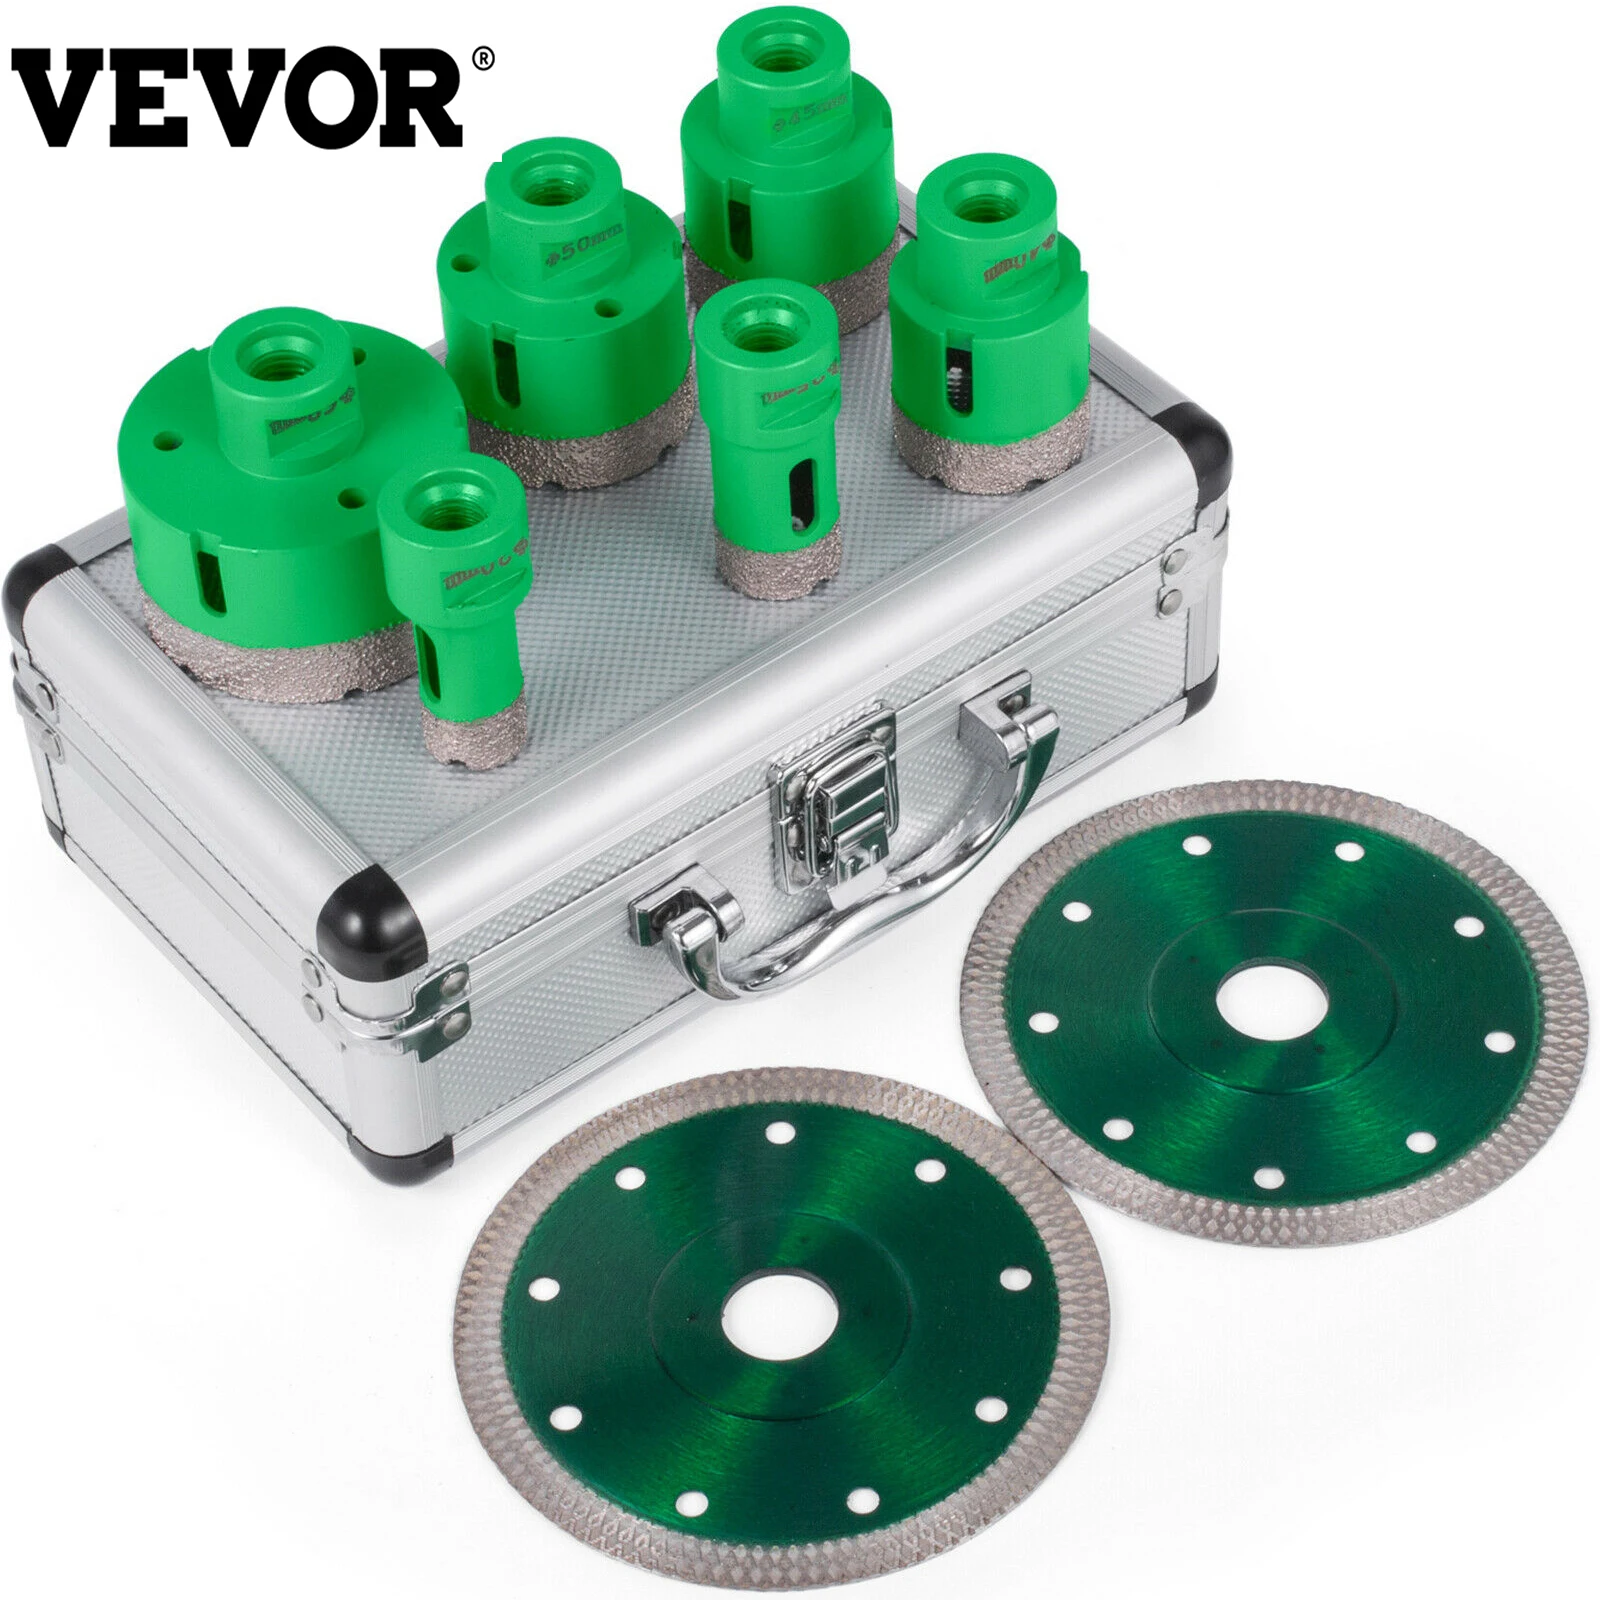 VEVOR Diamond Cutter Hole Saw Set Drill Bit and 1.4mm Thickness Blade M14 Mounting Thread W/ Case Tile Granite Marble Porcelain